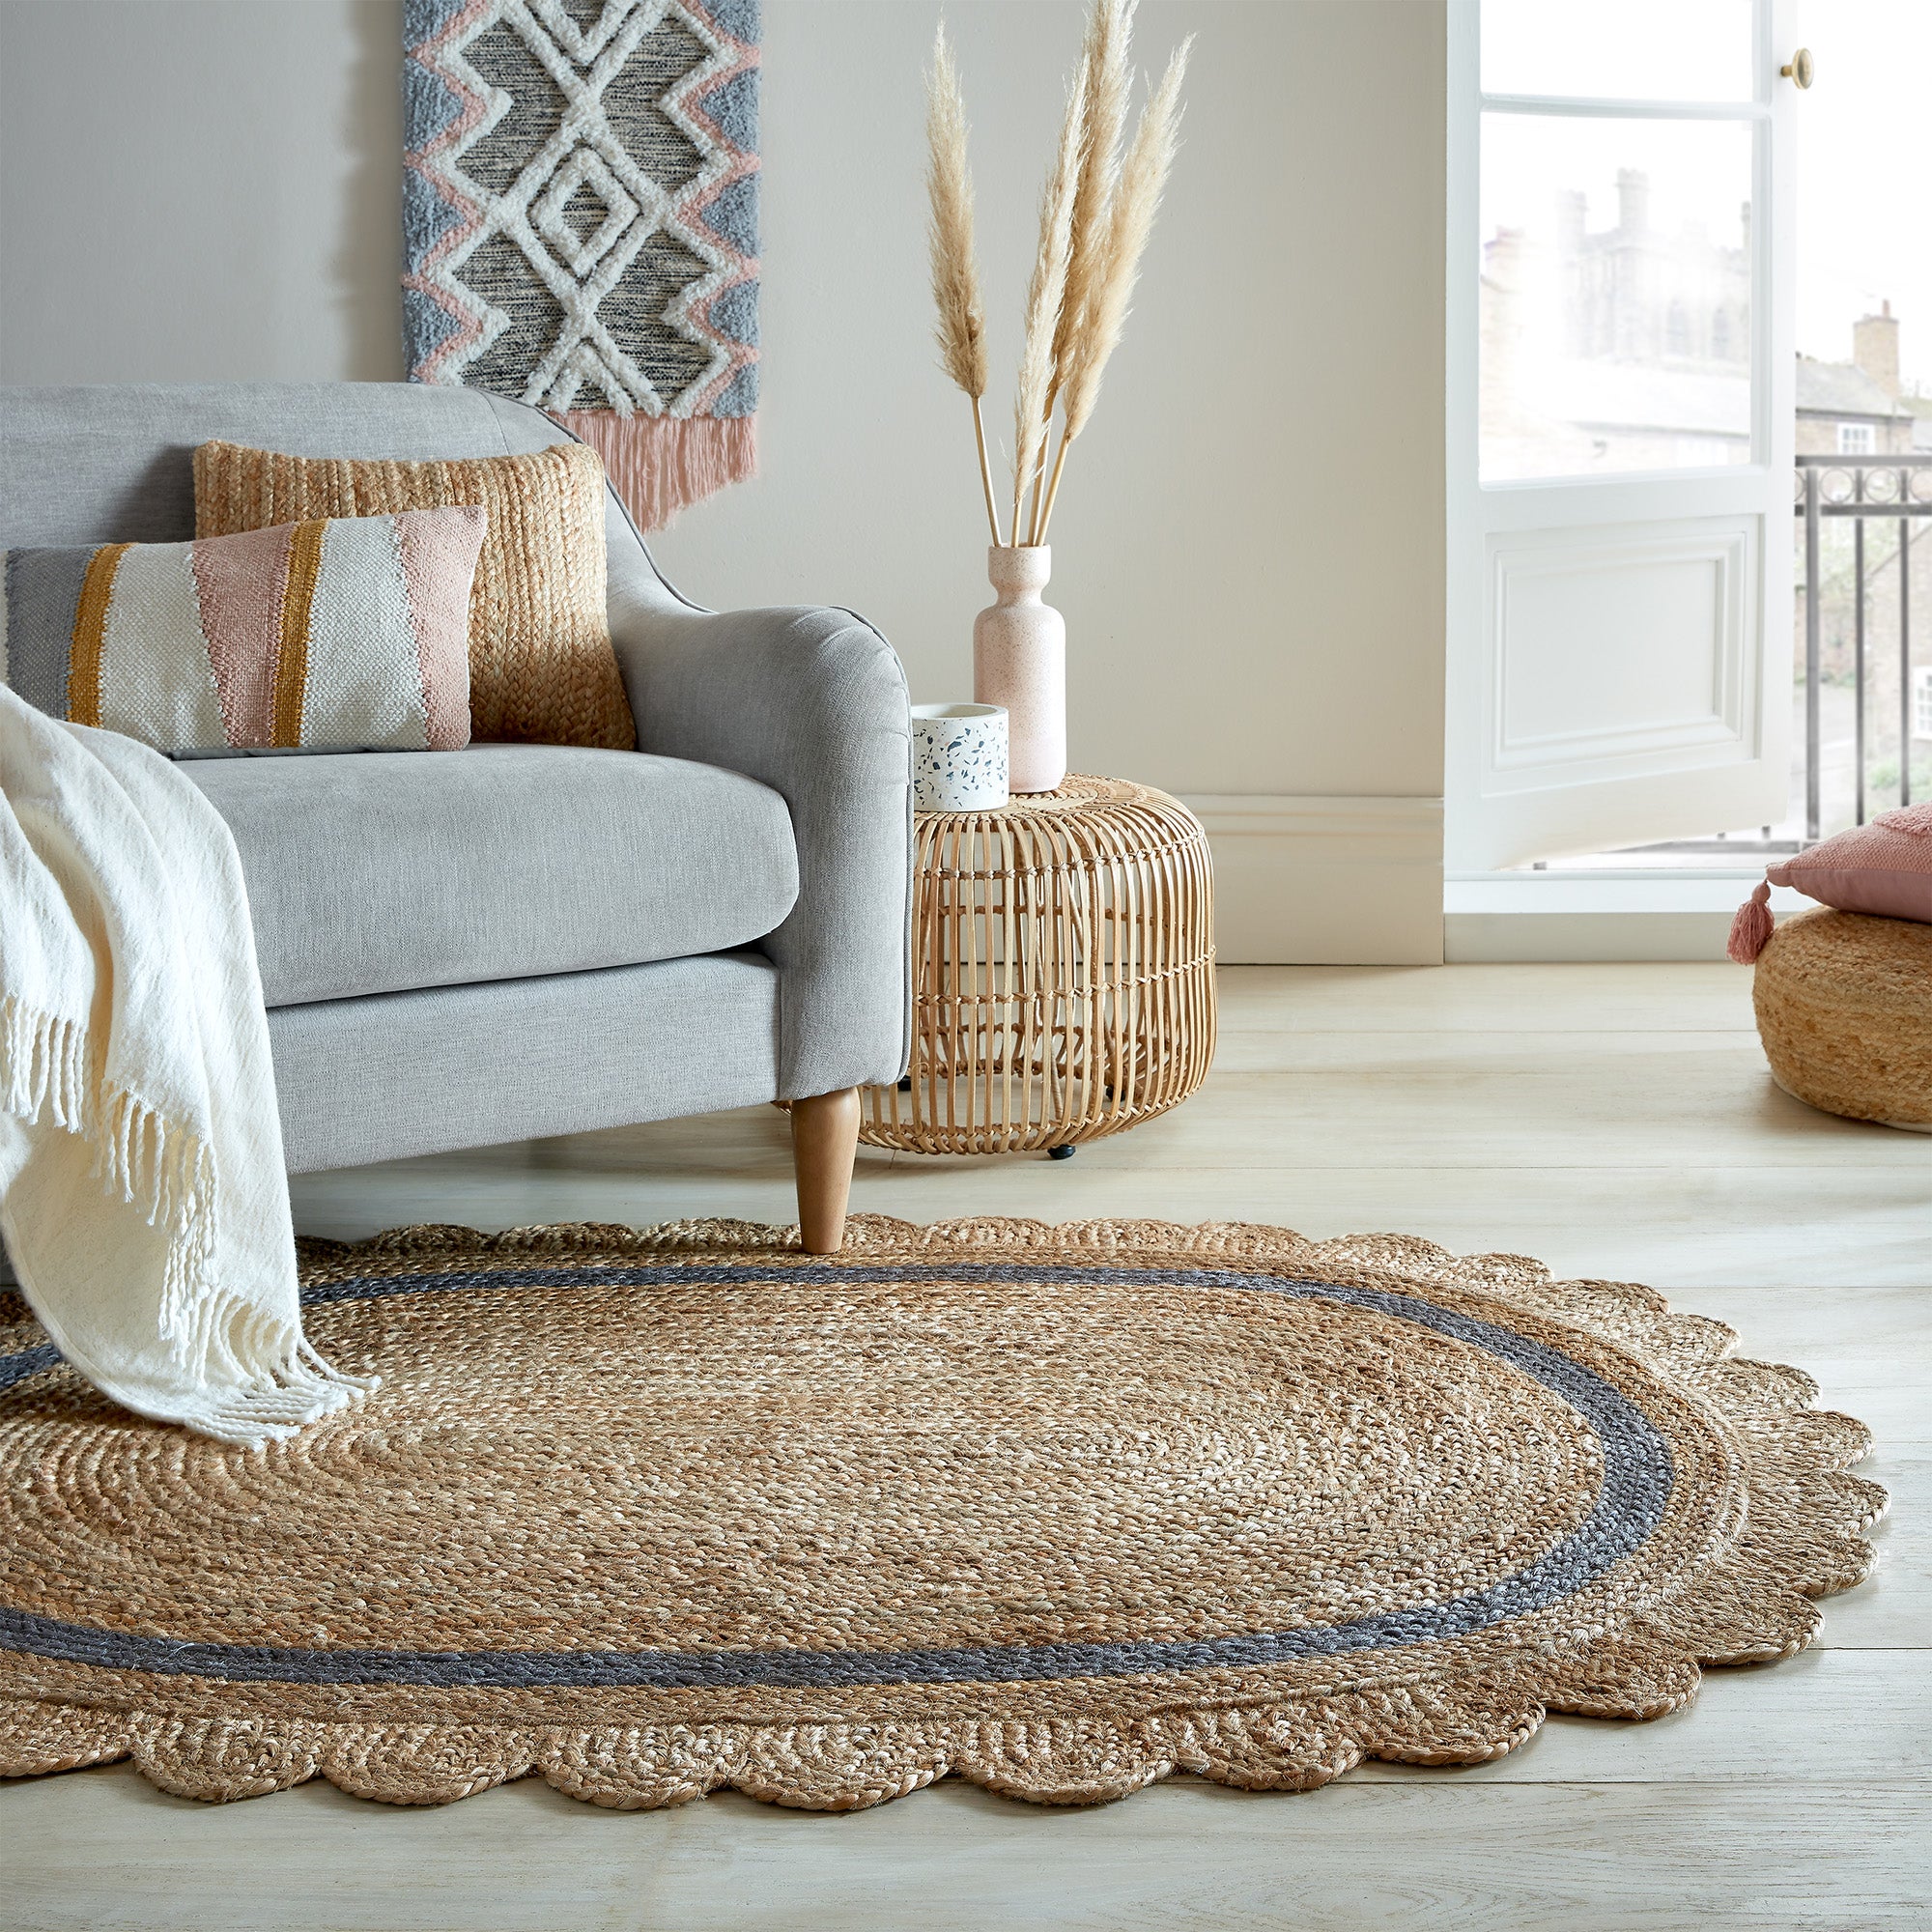 Oval Braided Jute Rug in Cream White, Grey, Black, Navy Blue Border, Oval  Jute Rug for Outdoor and Indoor, Scalloped Oval Jute Rug 